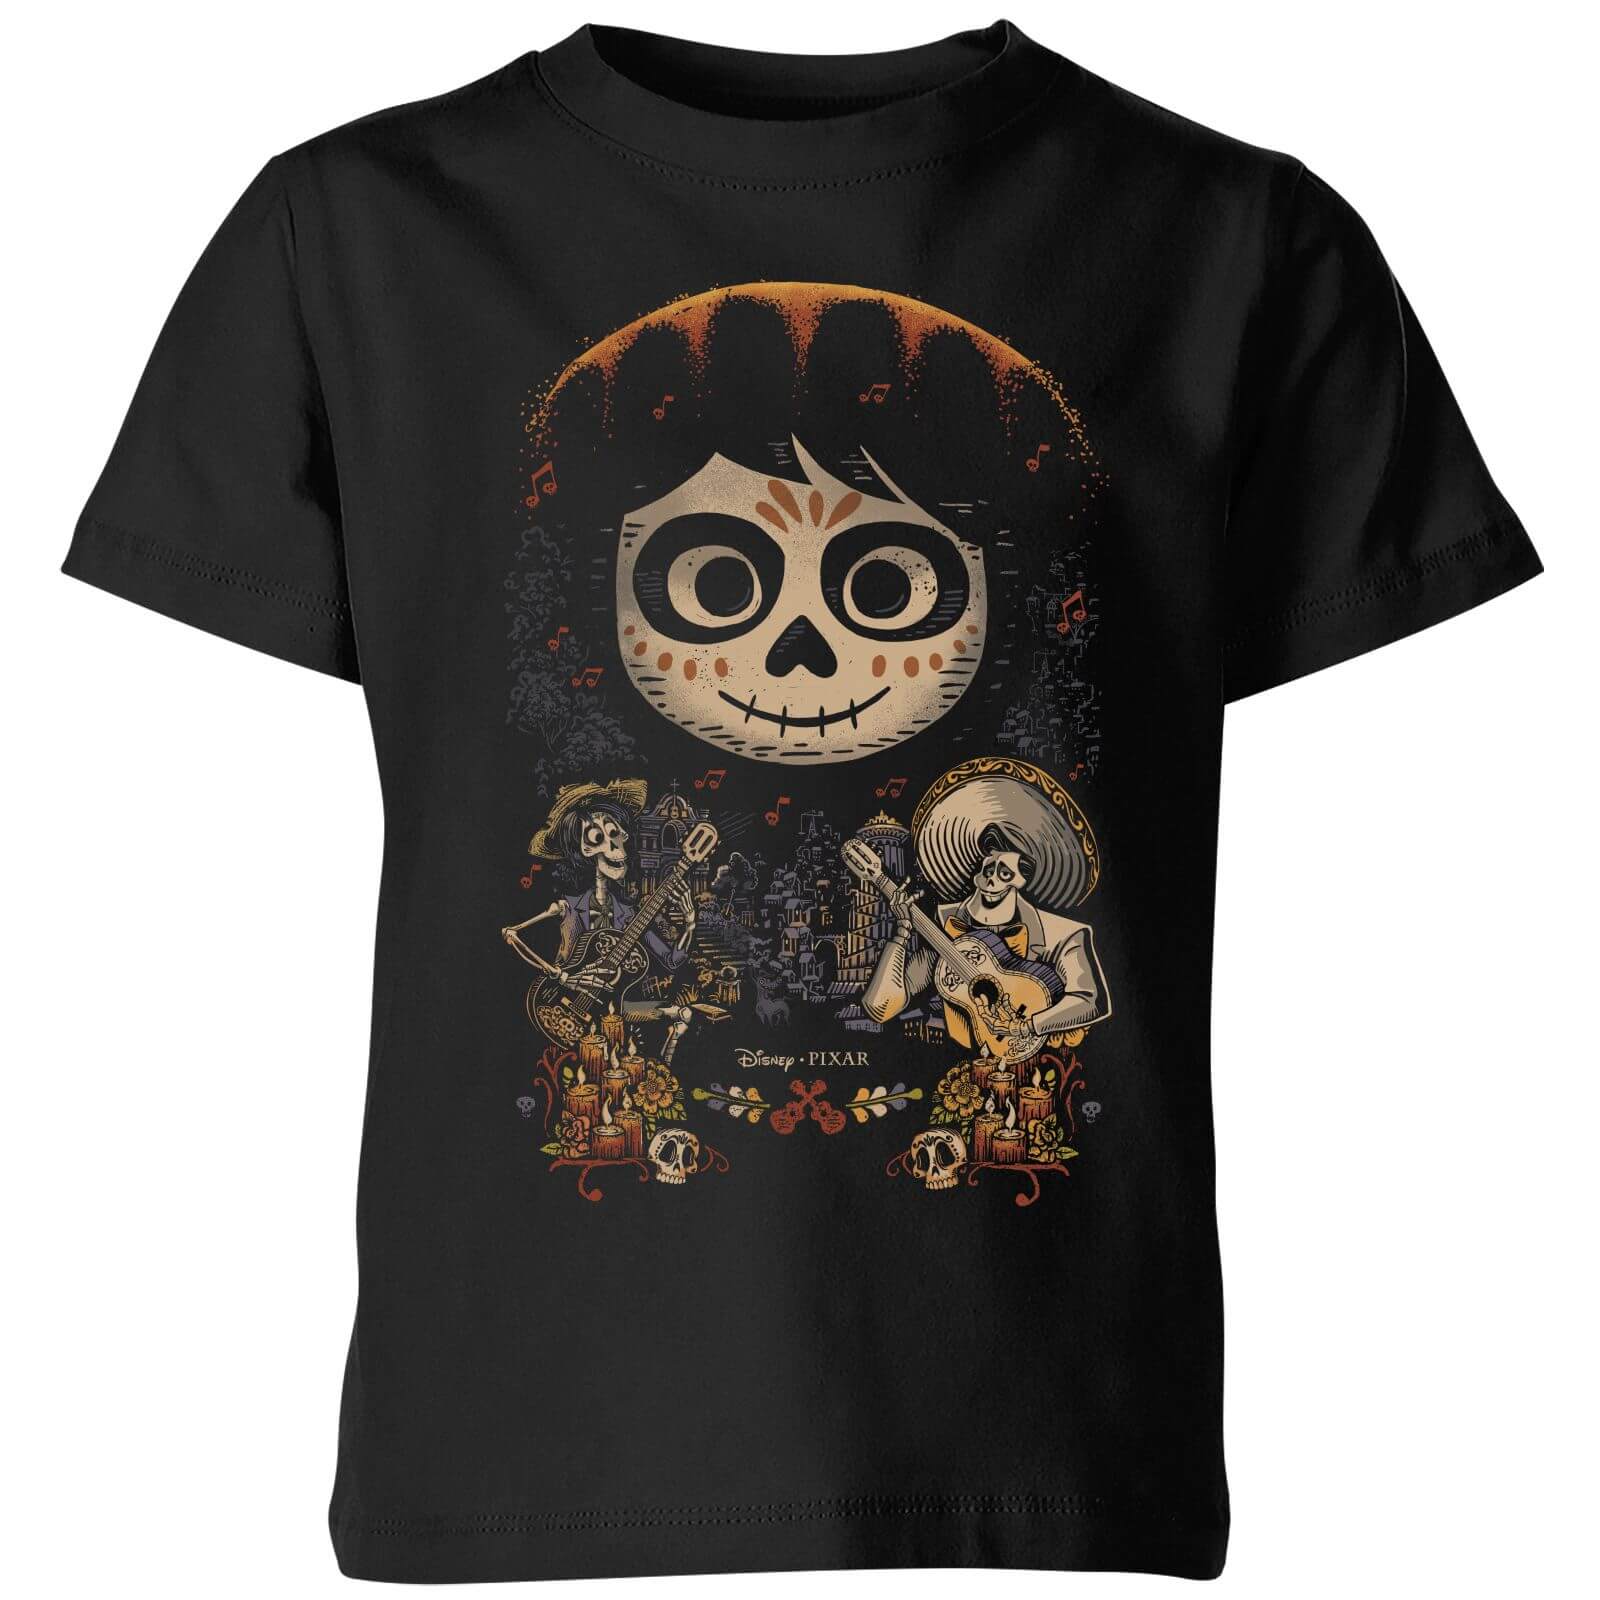 Pixar Coco Miguel Face Poster Kids' T-Shirt - Black - 9-10 Years - Black